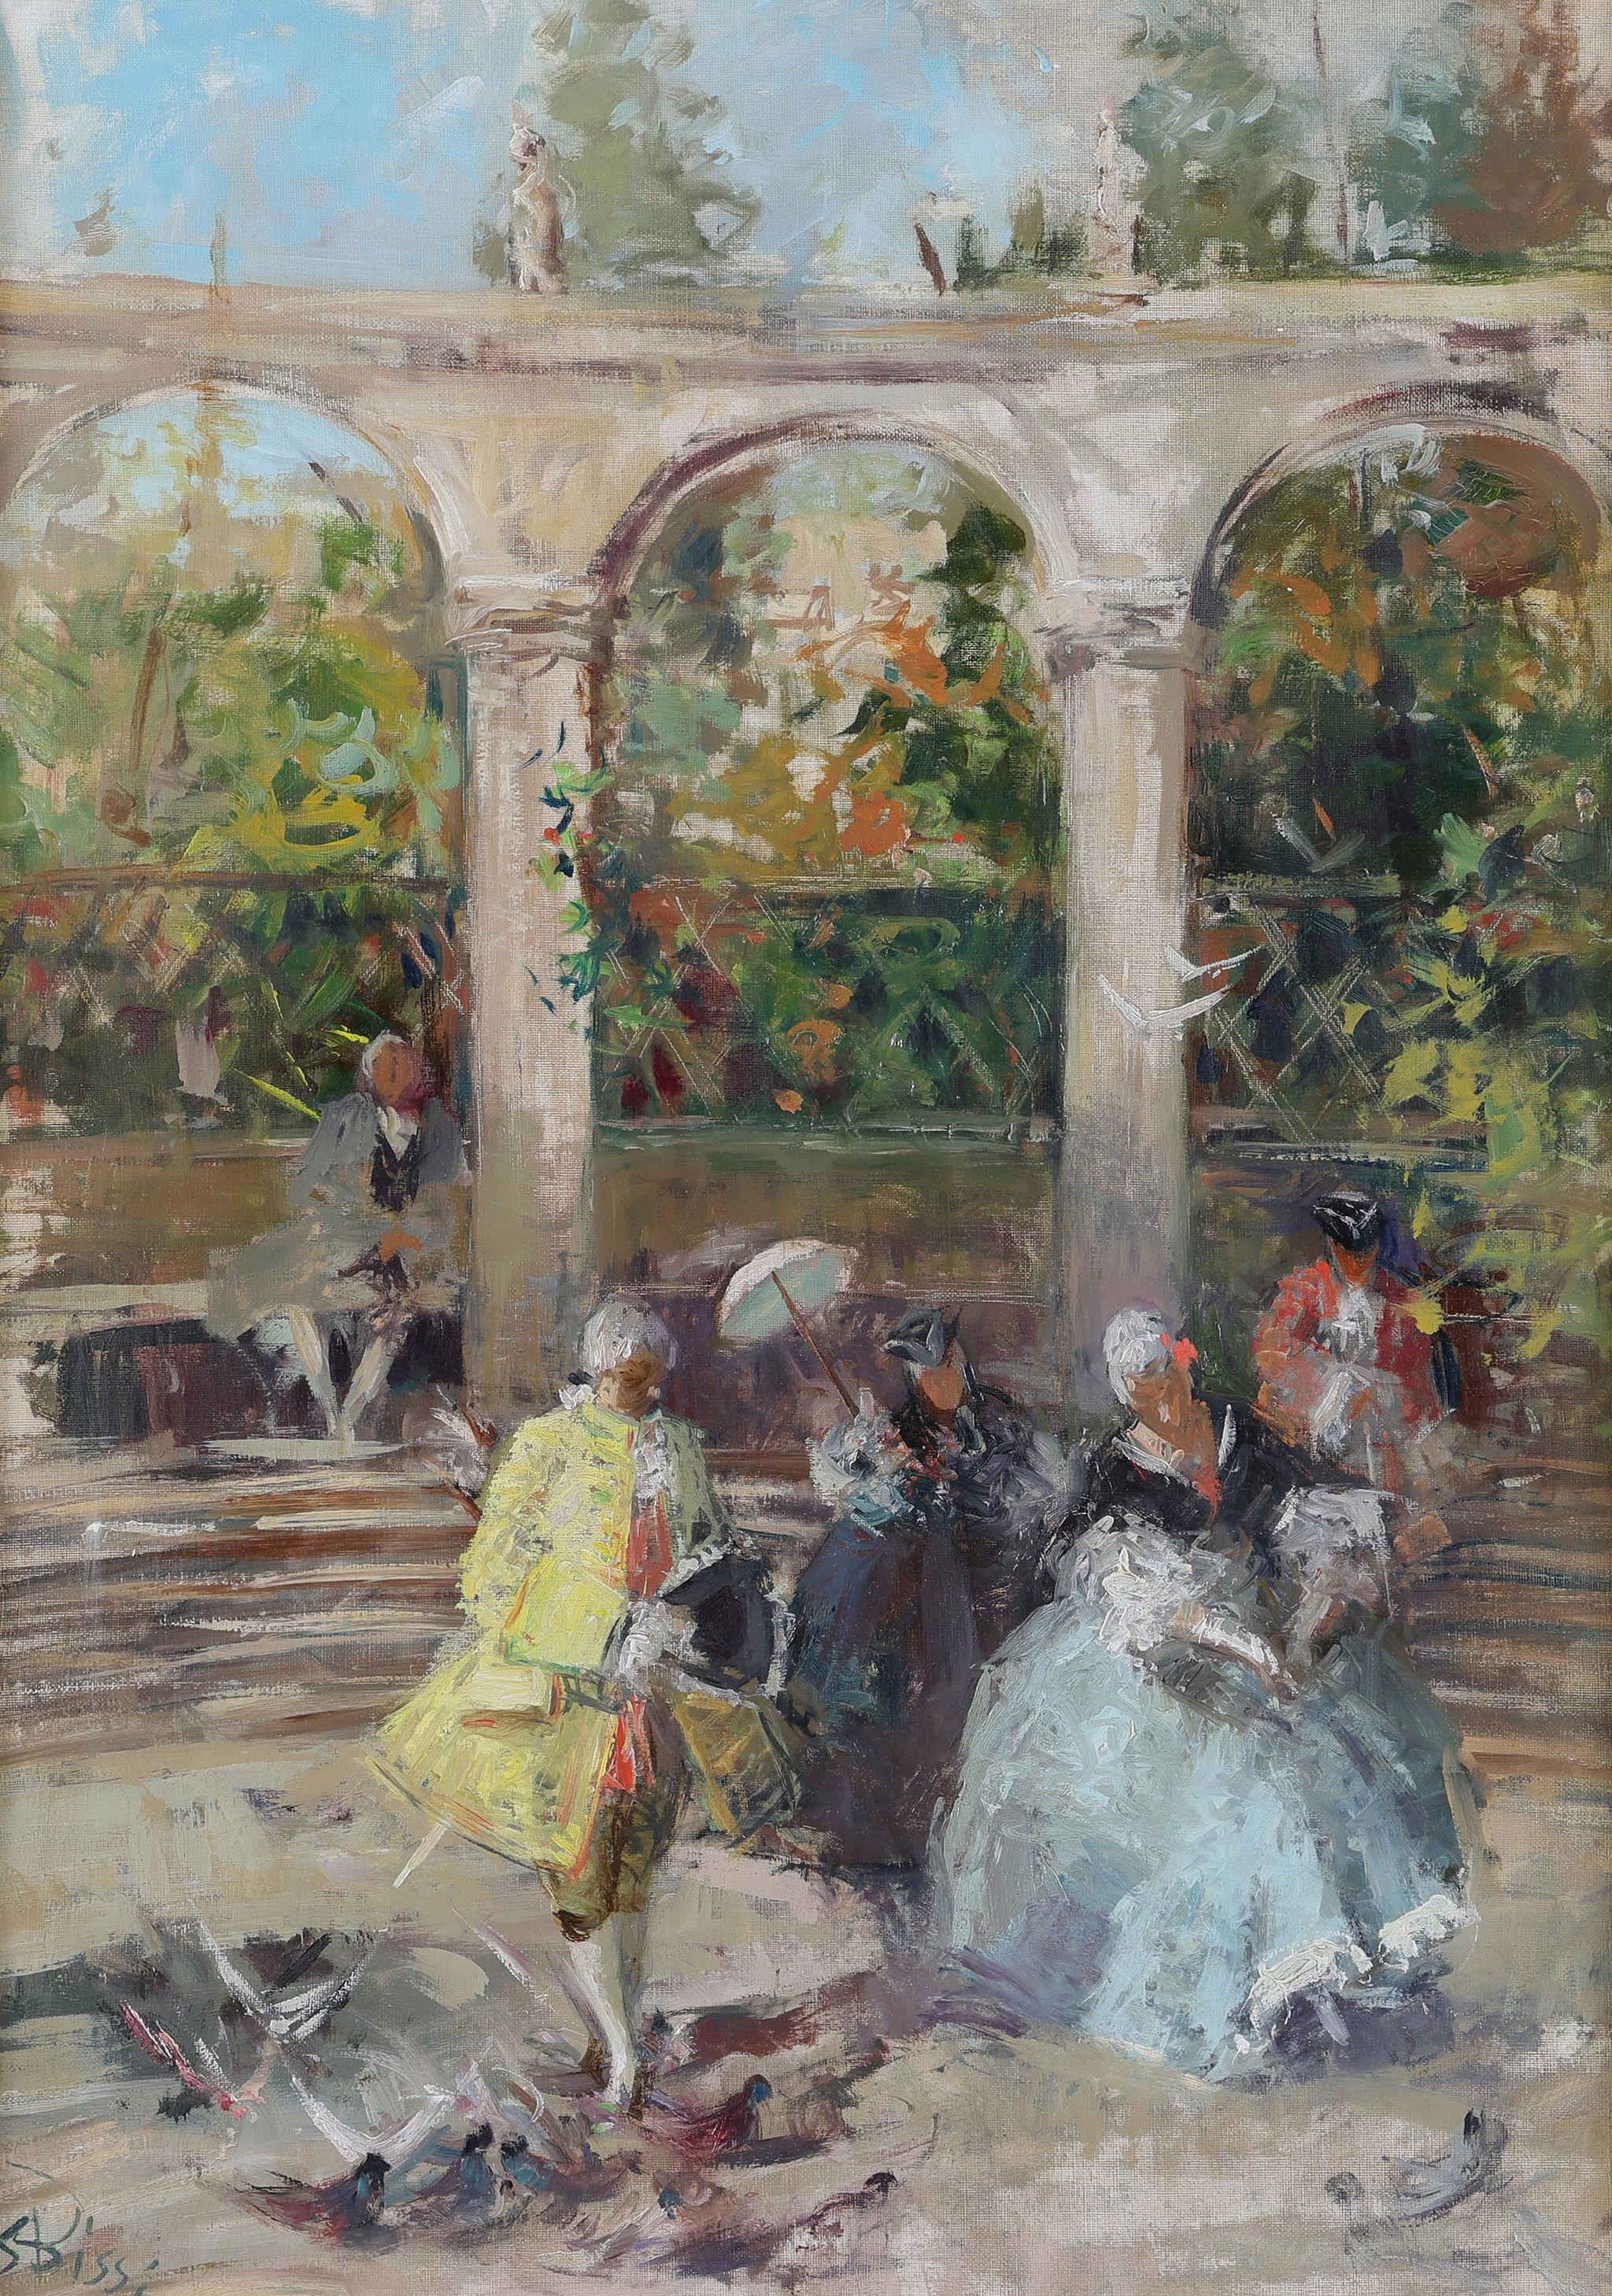 Figures in a Courtyard - Painting by sergio bissi